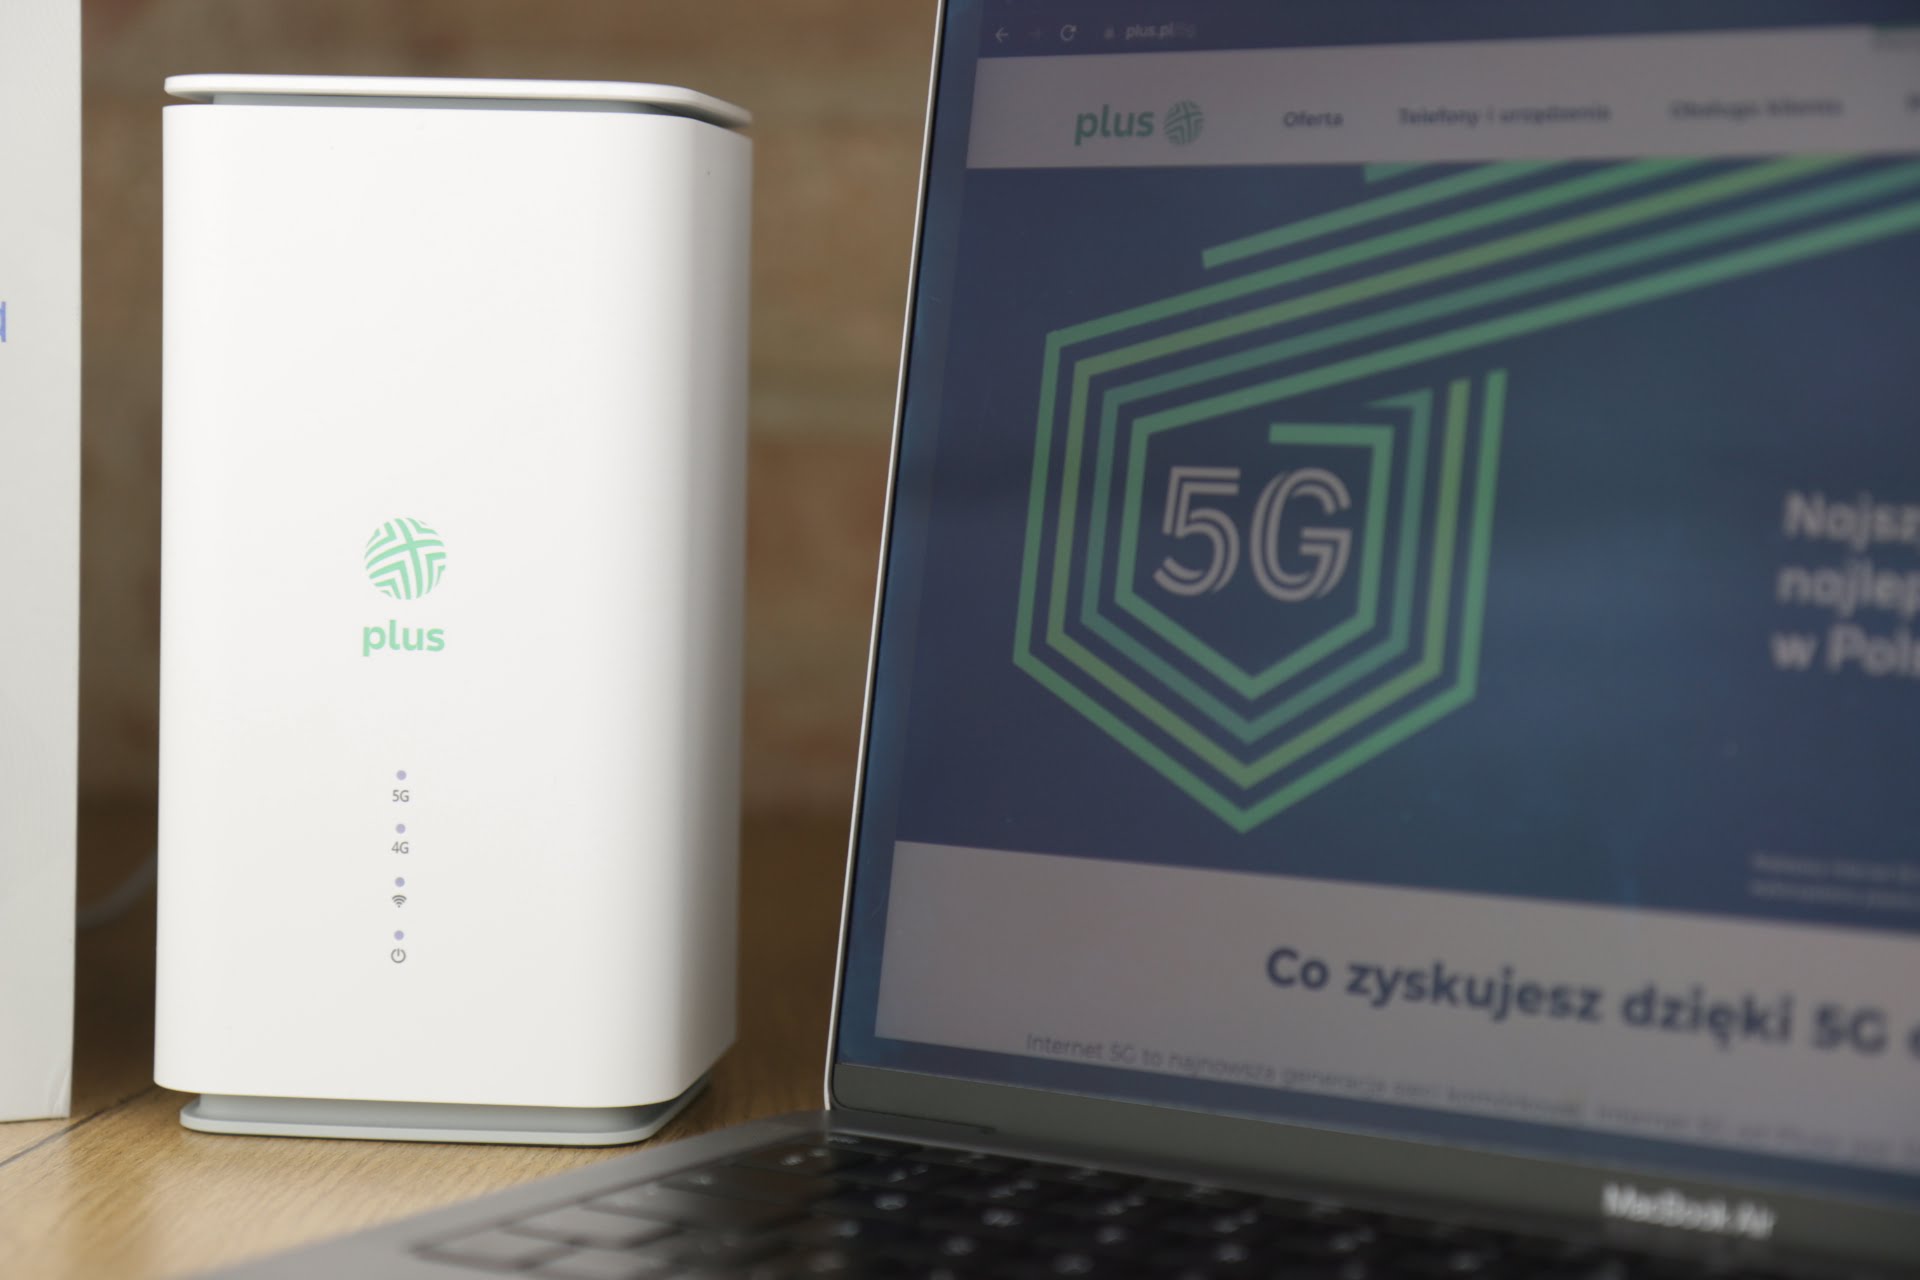 plus oppo 5g router test